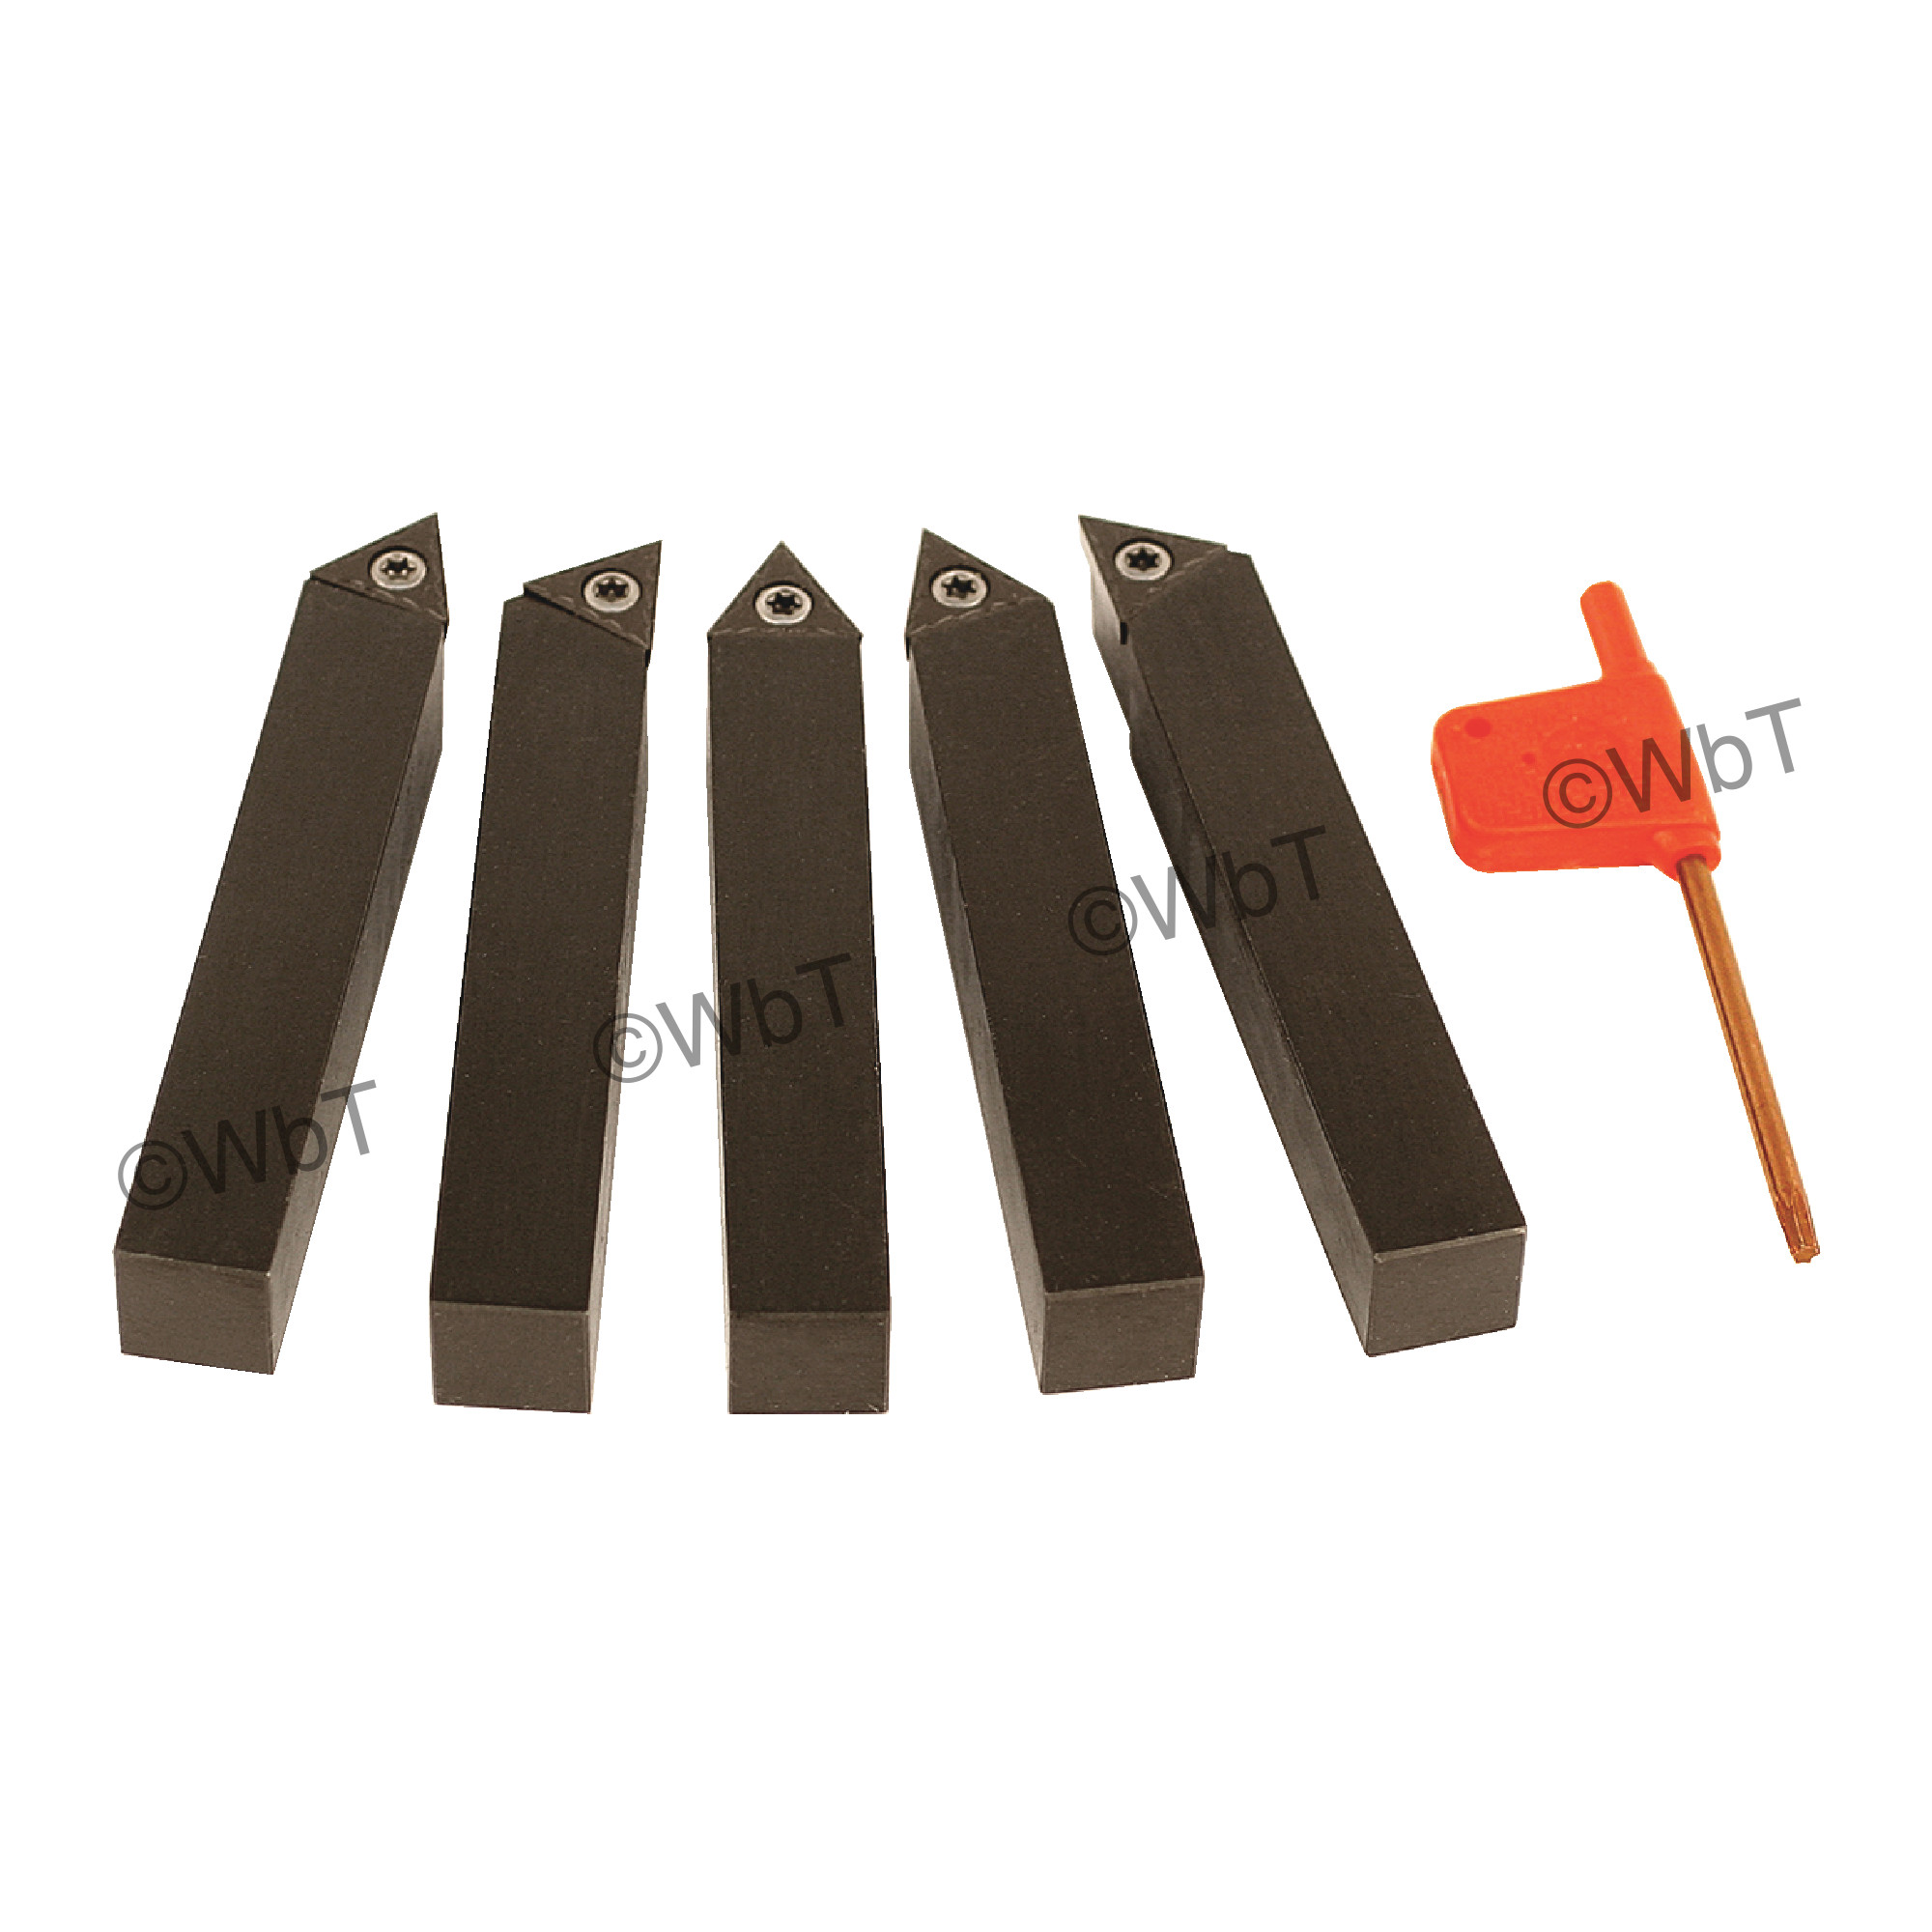 TERRA CARBIDE - 5 Piece External Turning Set with Inserts / Accepts TCMT2(1.5)_ Inserts / 3/8" Shank